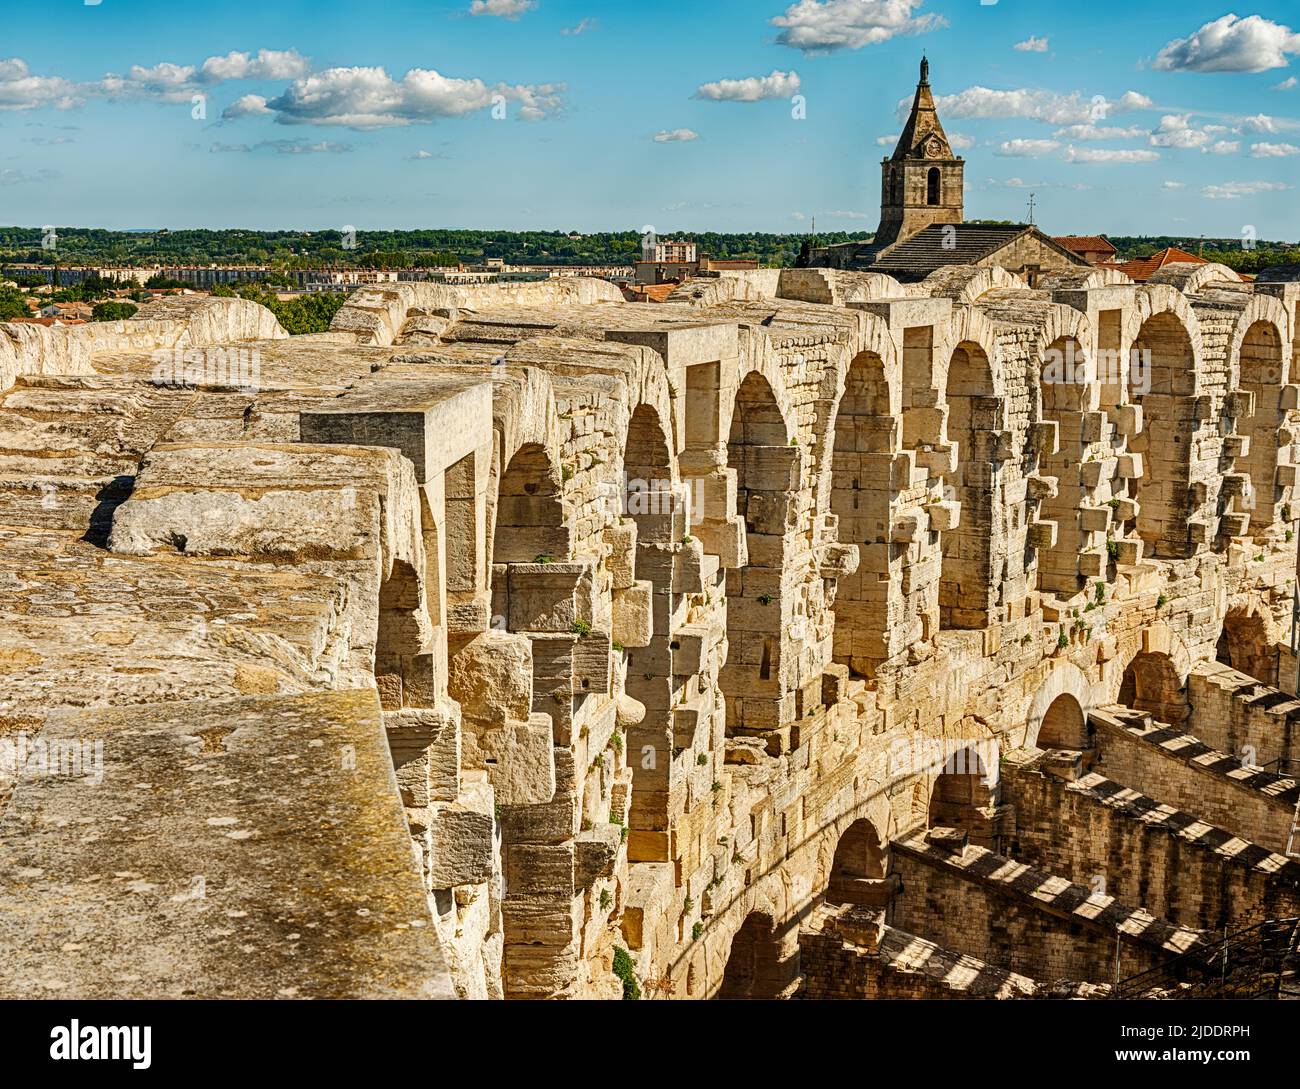 The view over the stone colonnade that surrounds the old Roman arena at Arles includes some church spires from the city. Stock Photo